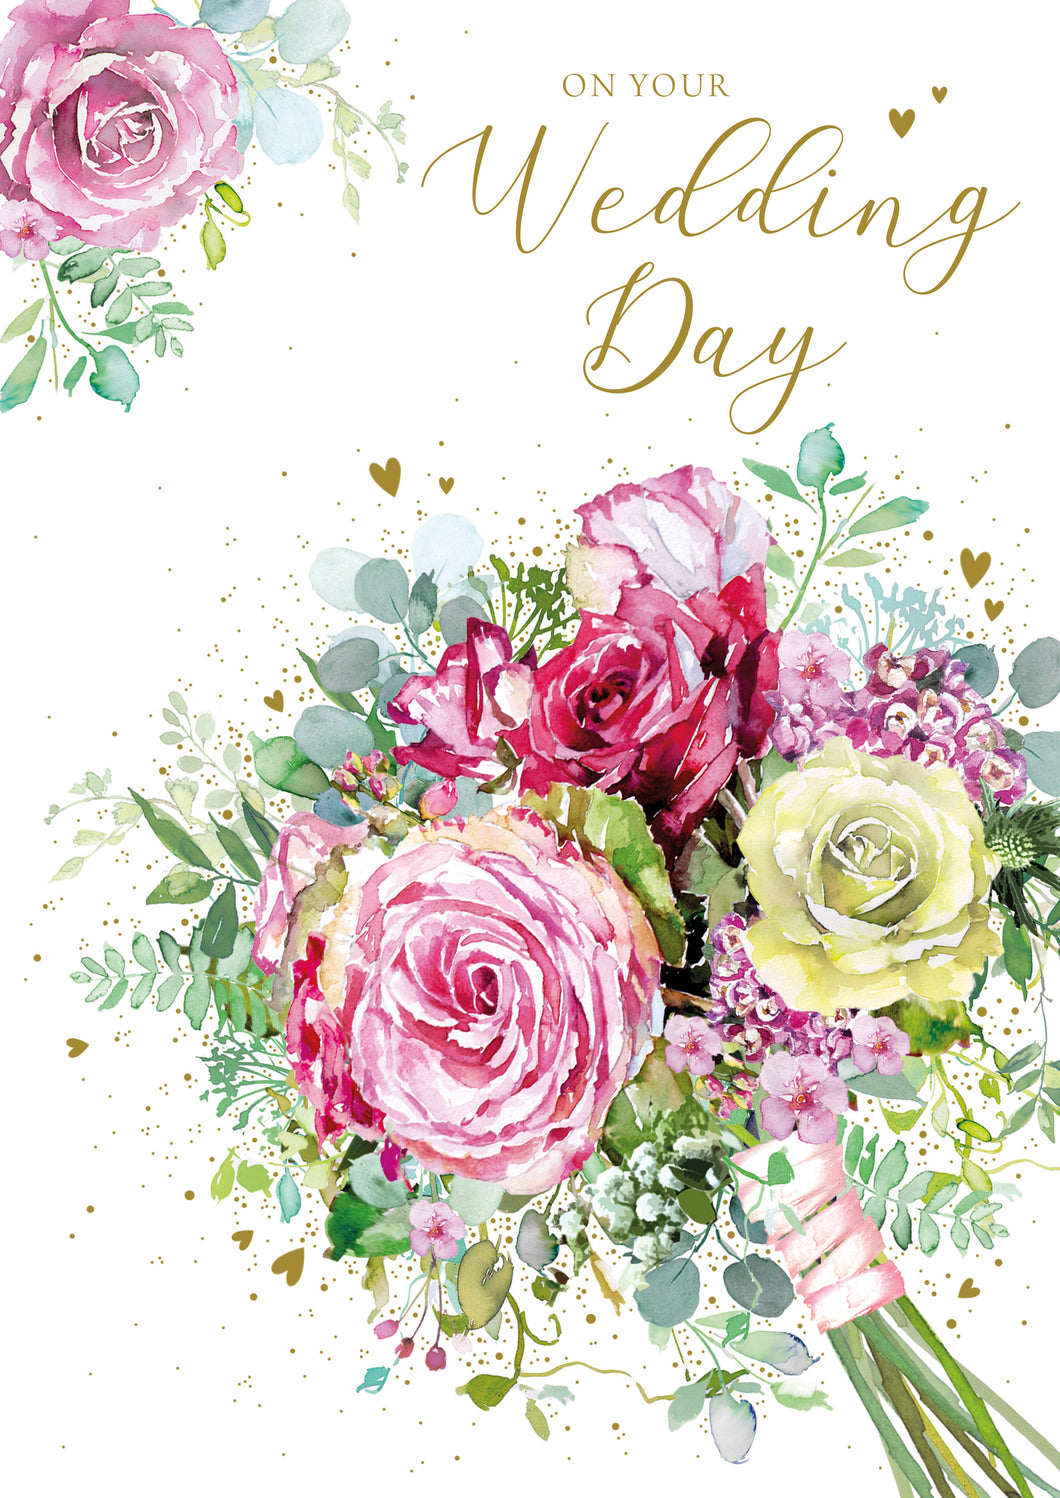 On Your Wedding Day - Wedding Day Cards